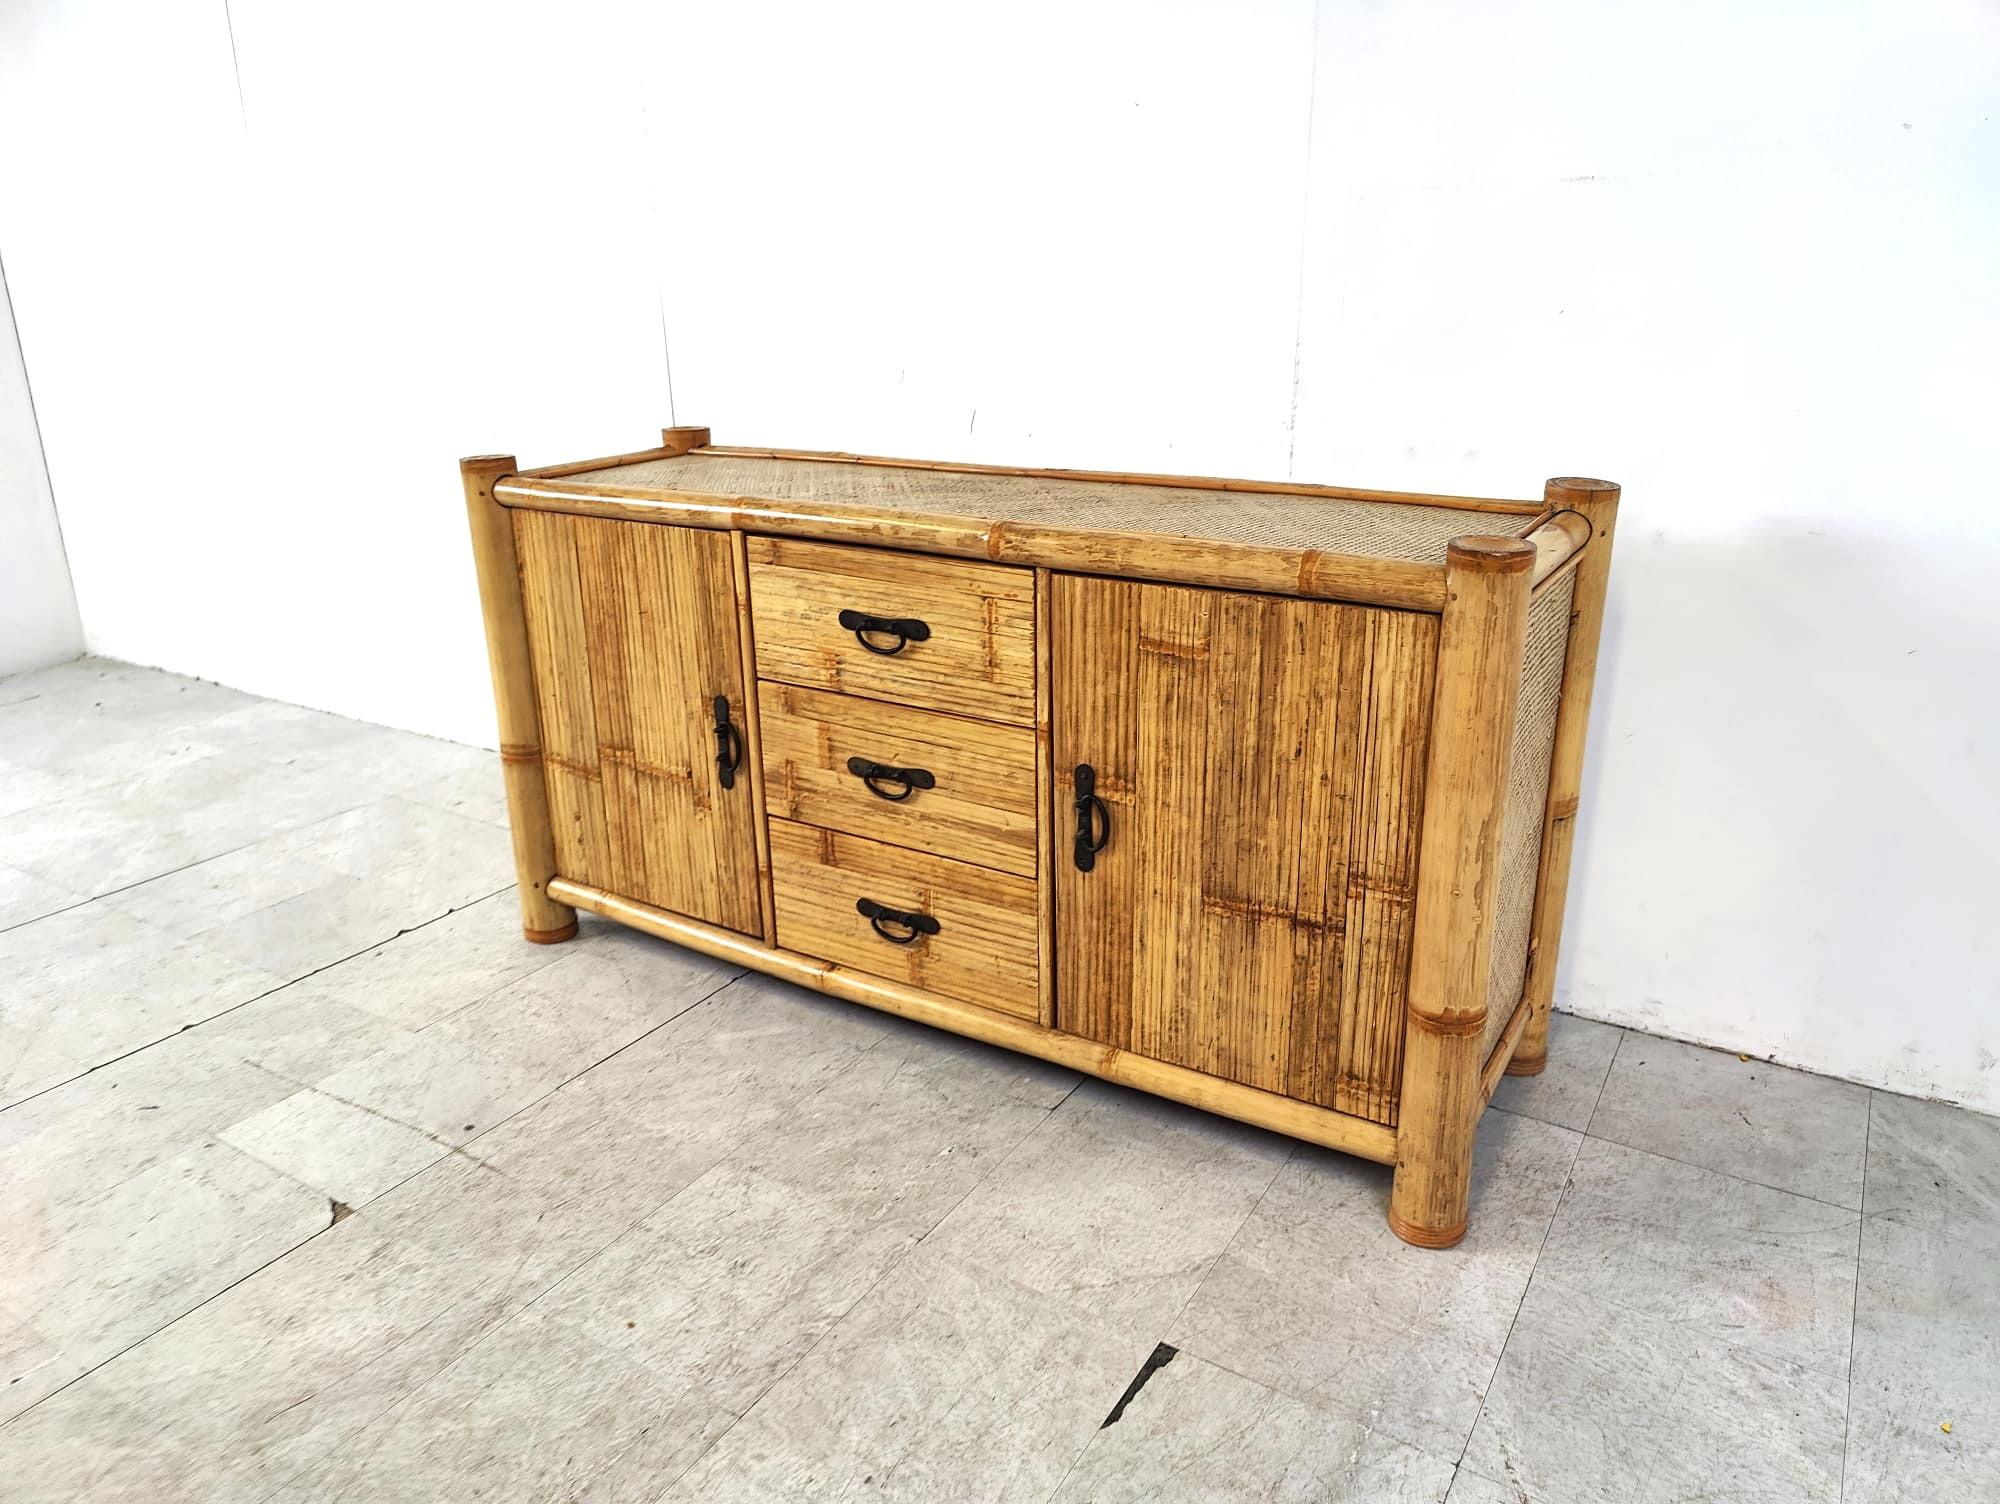 Wabi sabi bamboo sideboard with two doors and 3 central drawers.

Black metal handles.

Very well made sideboard with thick bamboo legs, bamboo doors and rattan top and side panels.

1970s - France

Dimensions:

Height: 80cm
Width: 160cm
Depth: